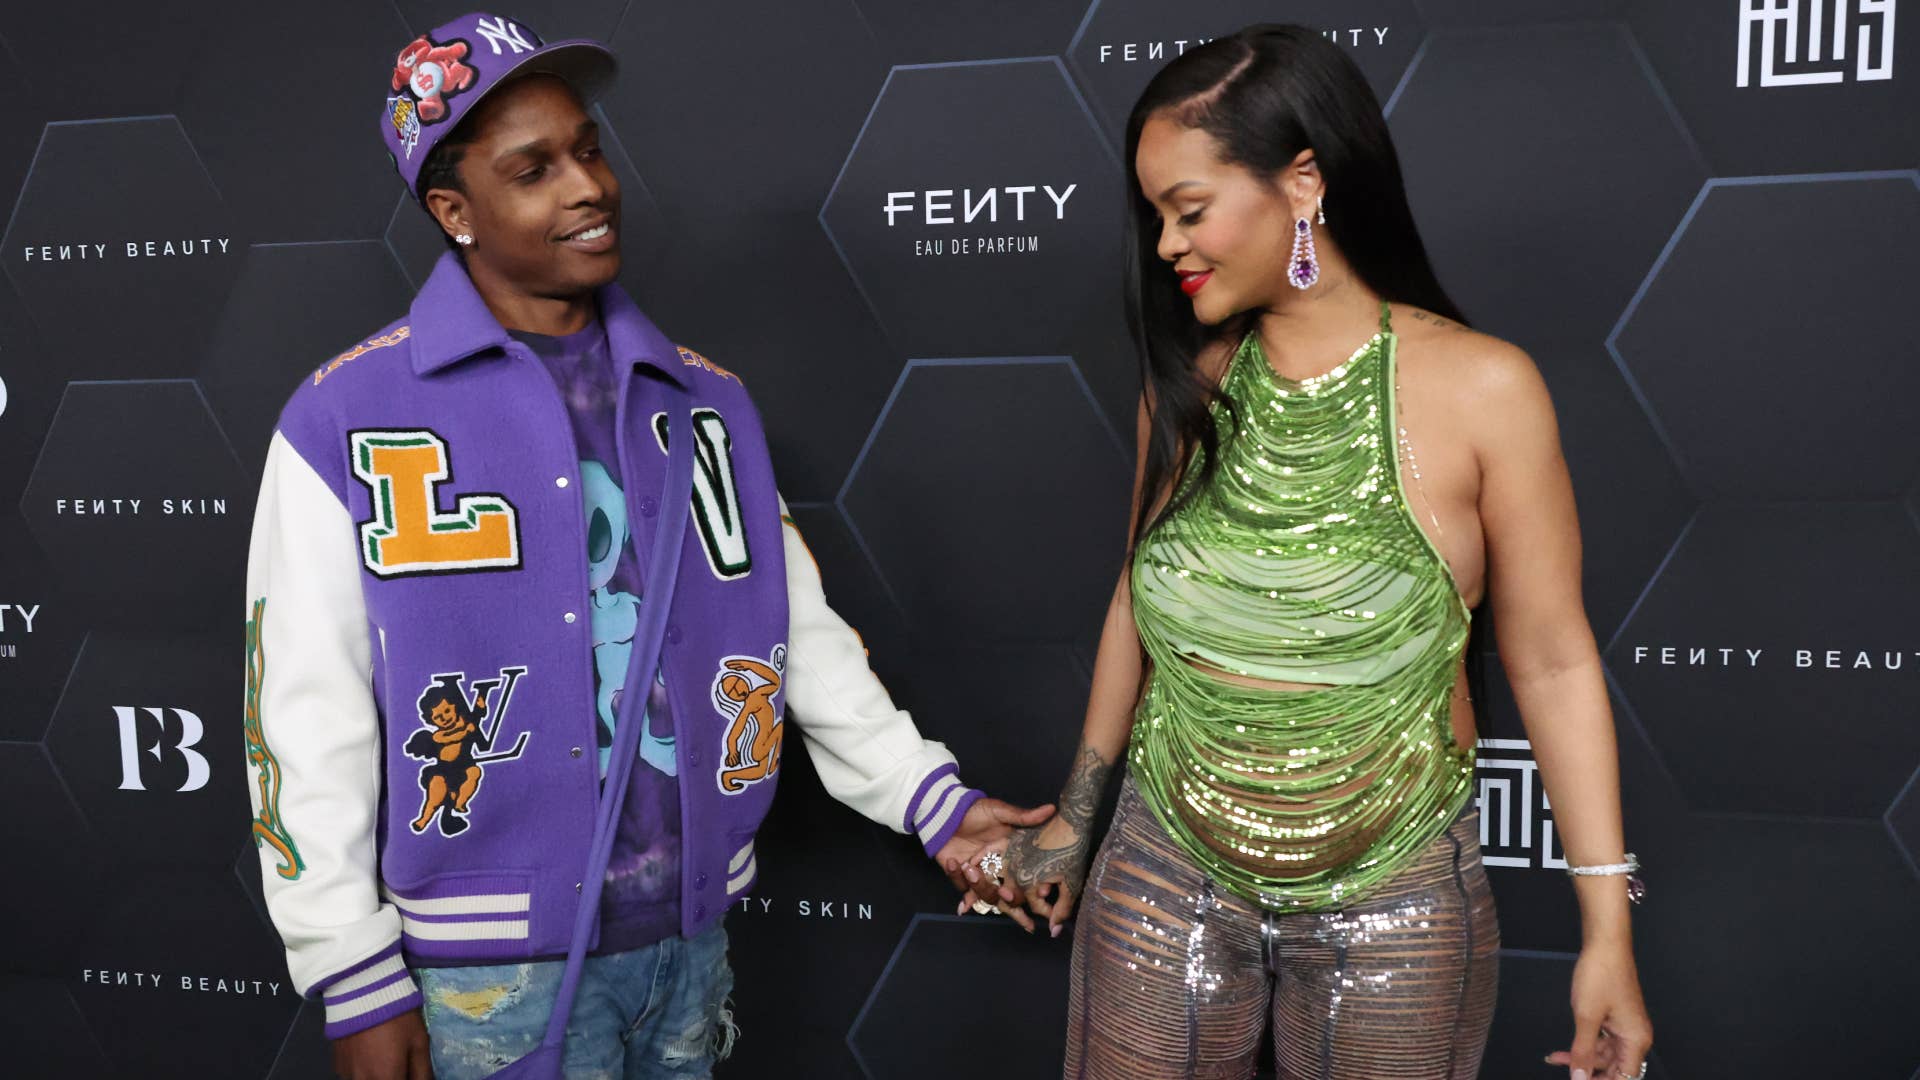 ASAP Rock and Rihanna are pictured at a Fenty event